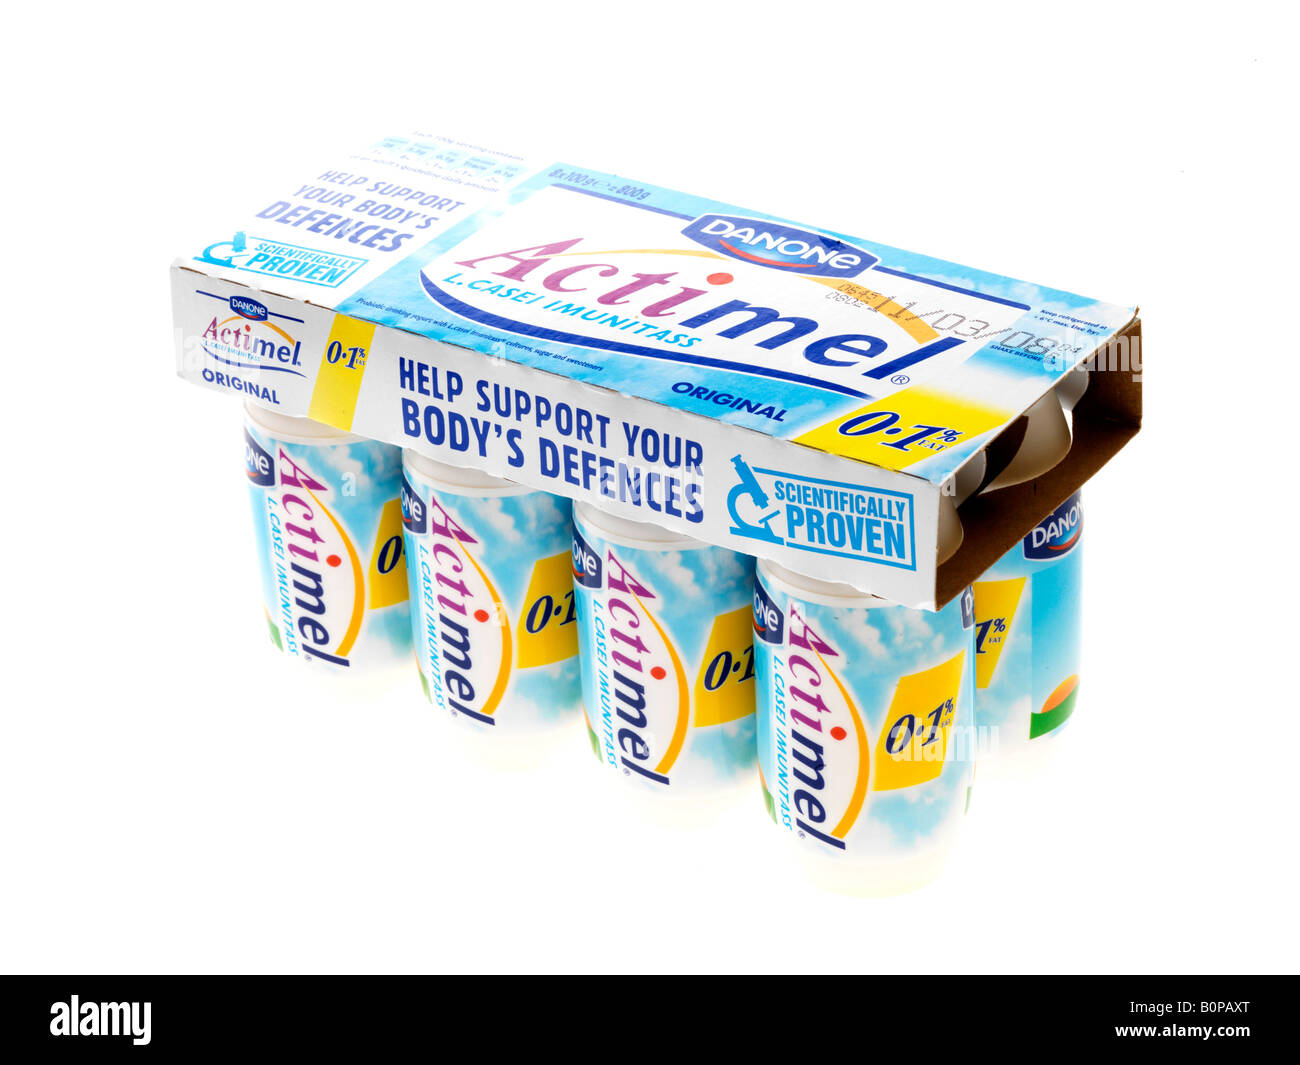 Actimel hi-res stock - images Alamy and photography